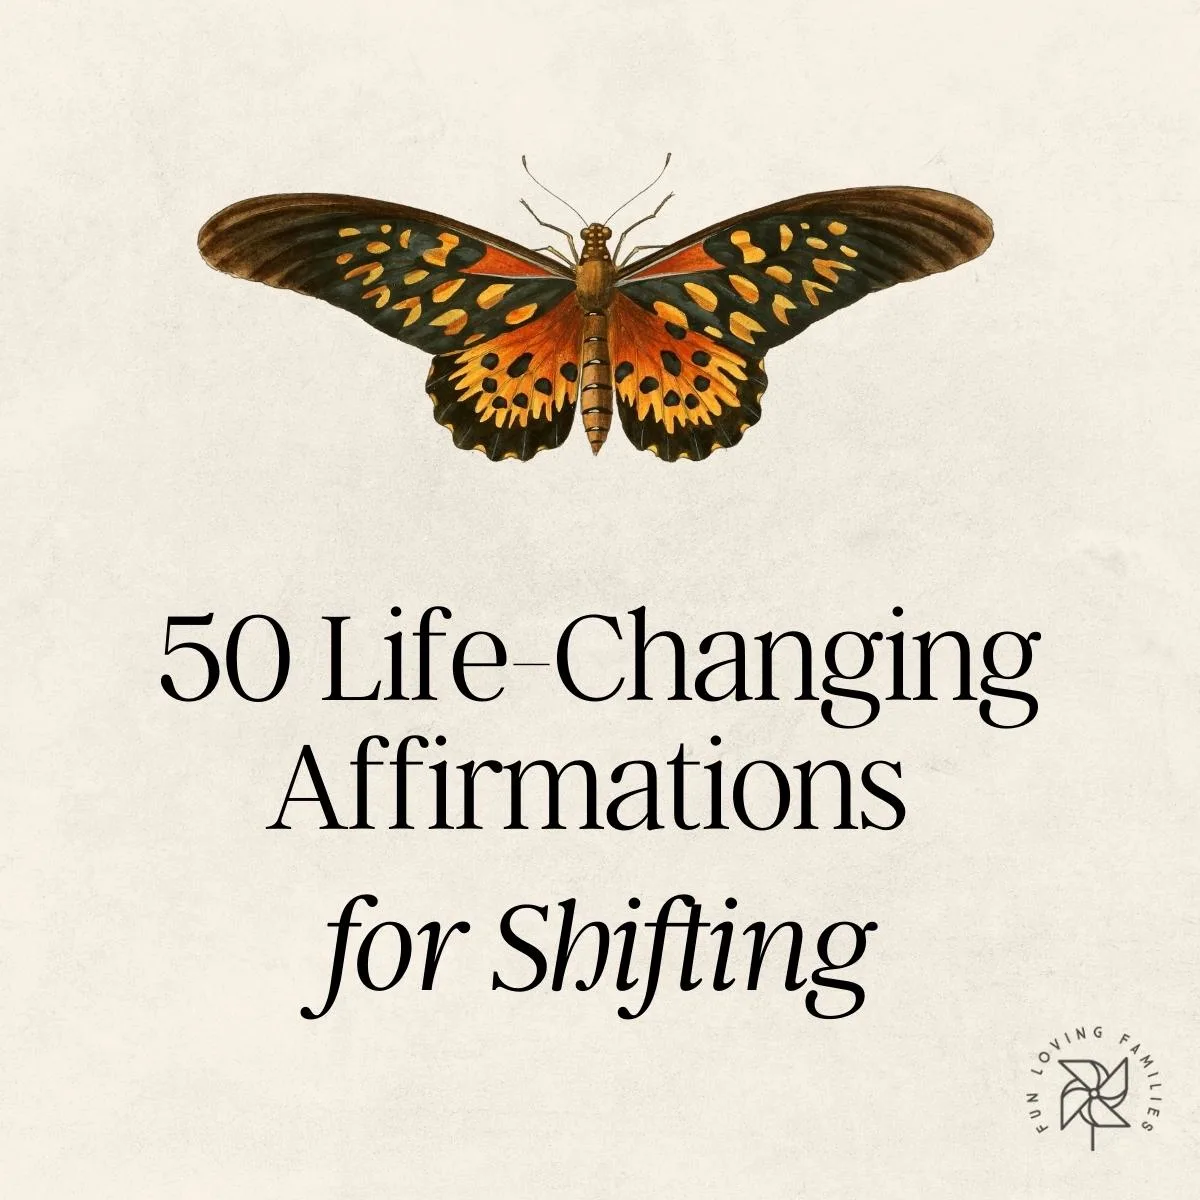 affirmations to change your life